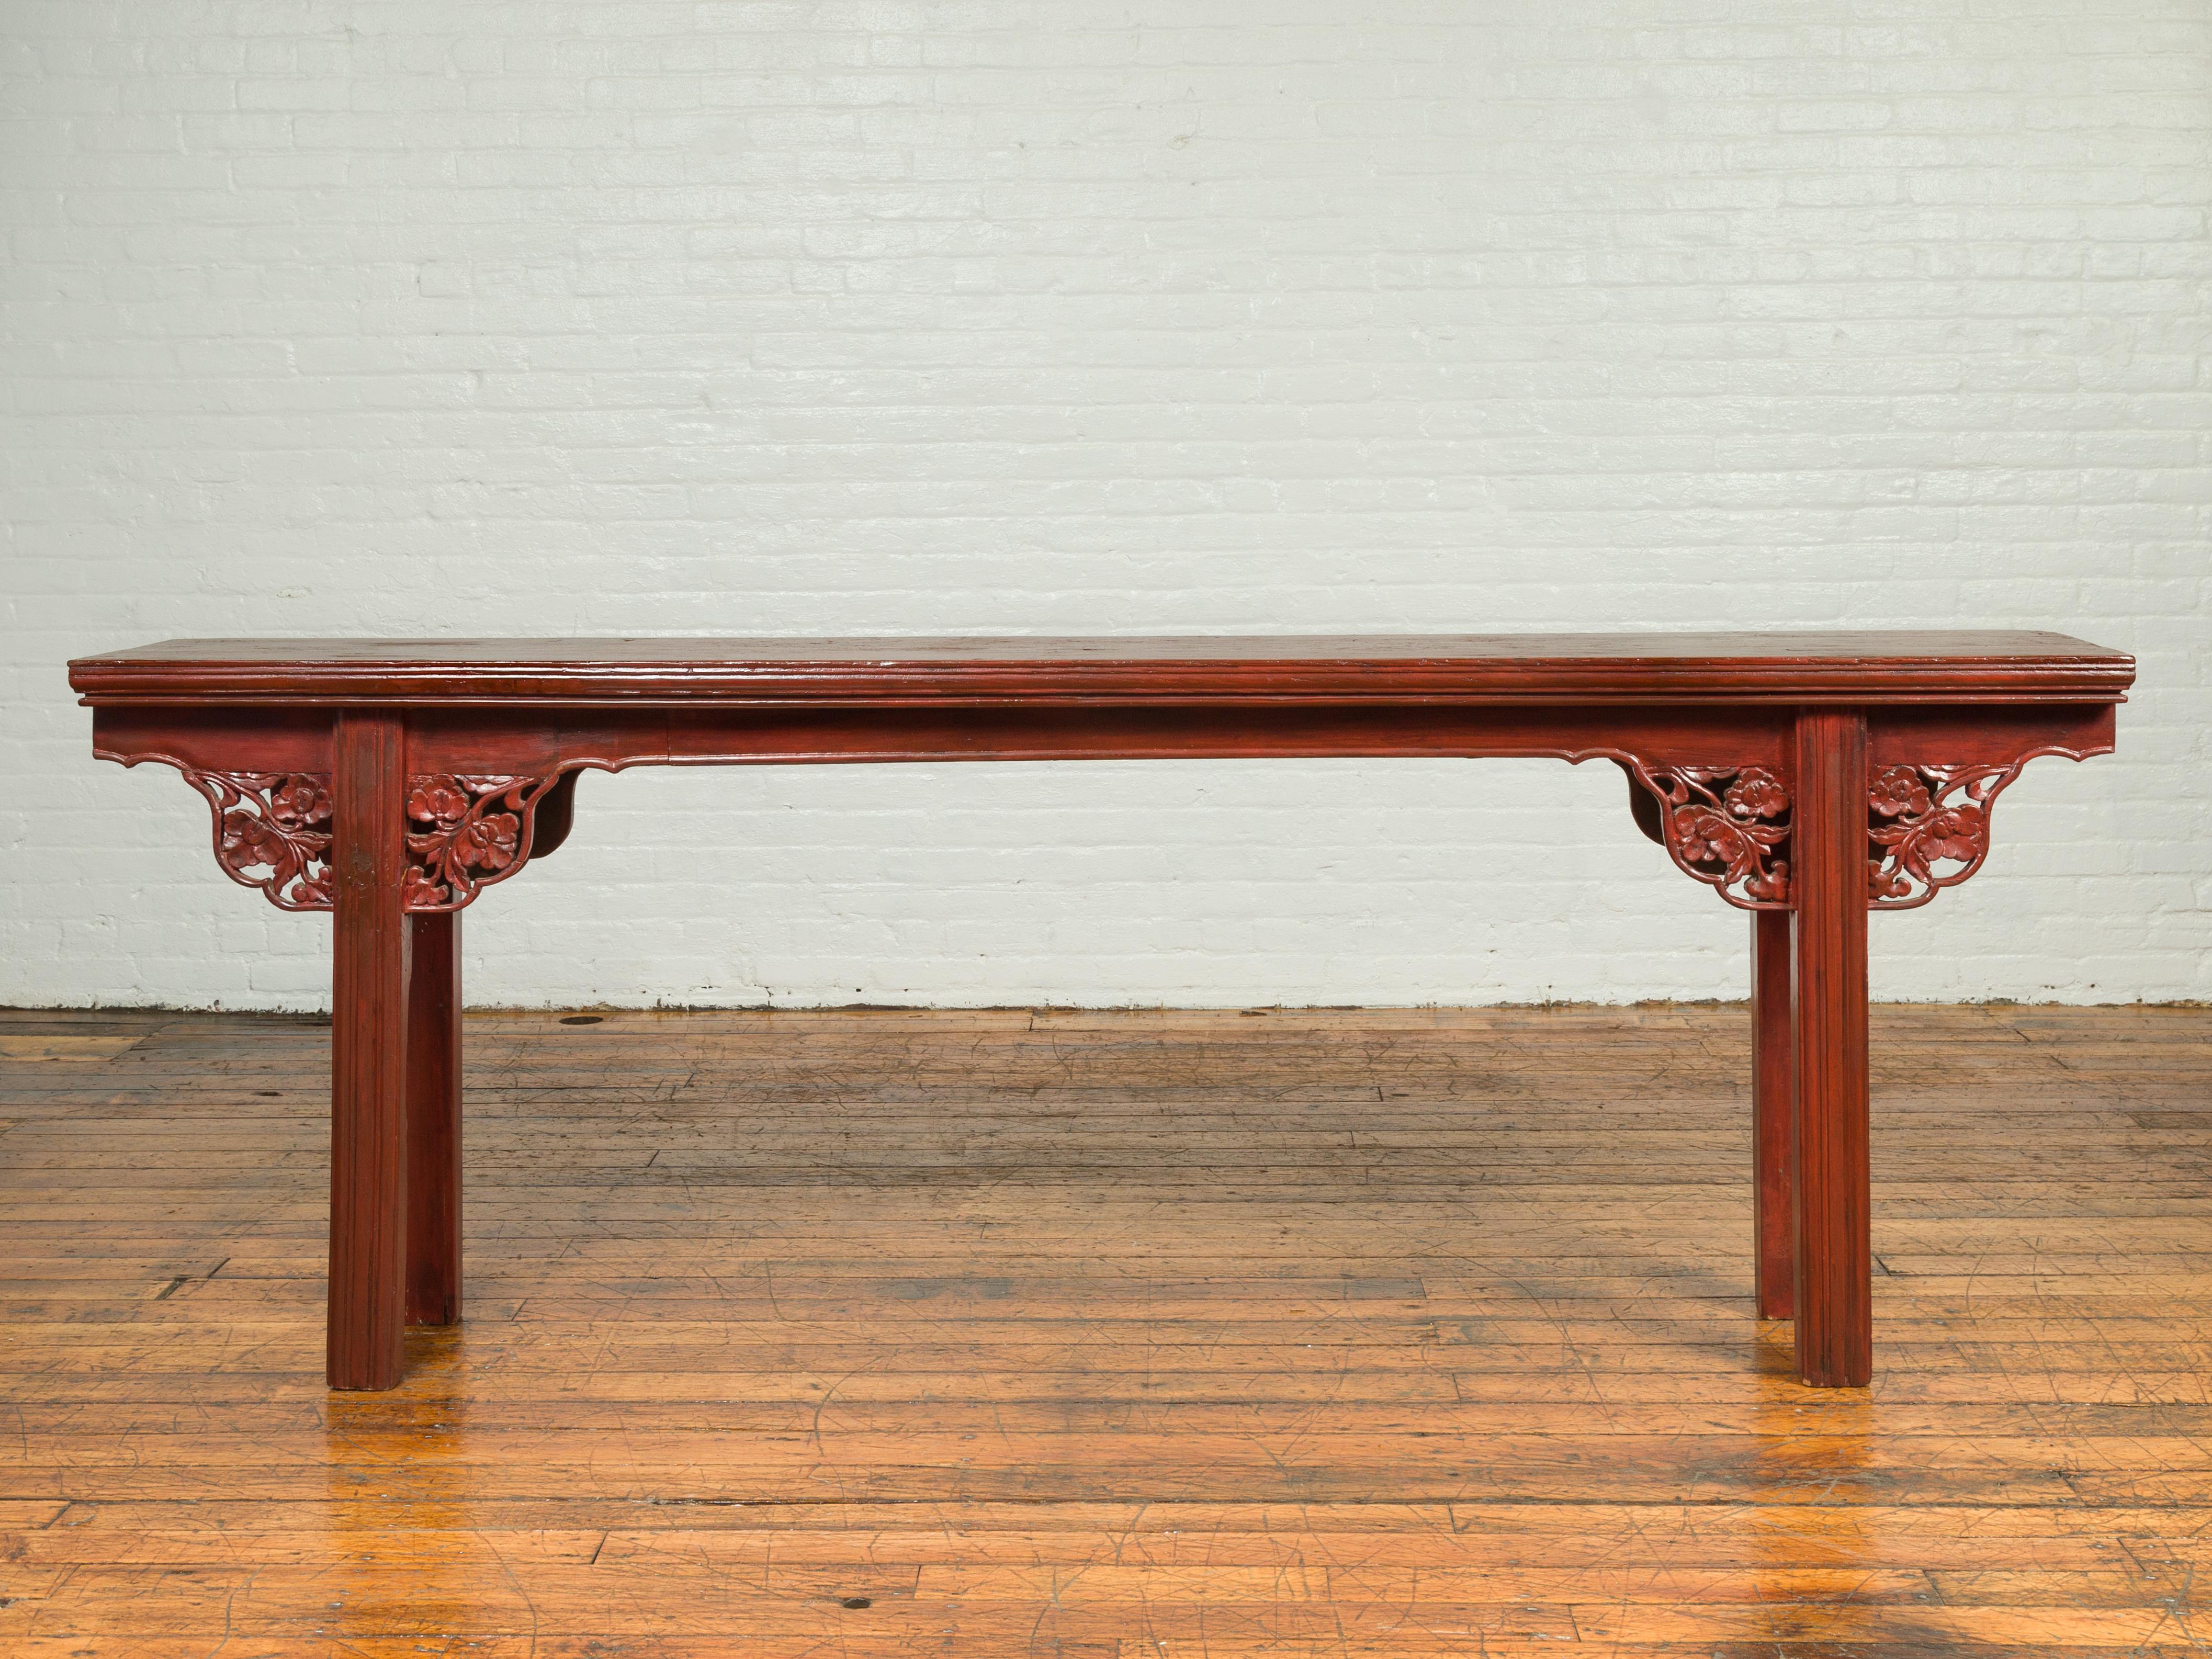 A Chinese Ming Dynasty style elm wood altar console table from the 19th century, with sang de bœuf patina and carved floral apron. Born in China during the 19th century, this exquisite altar console table features a dark red lacquered finish,